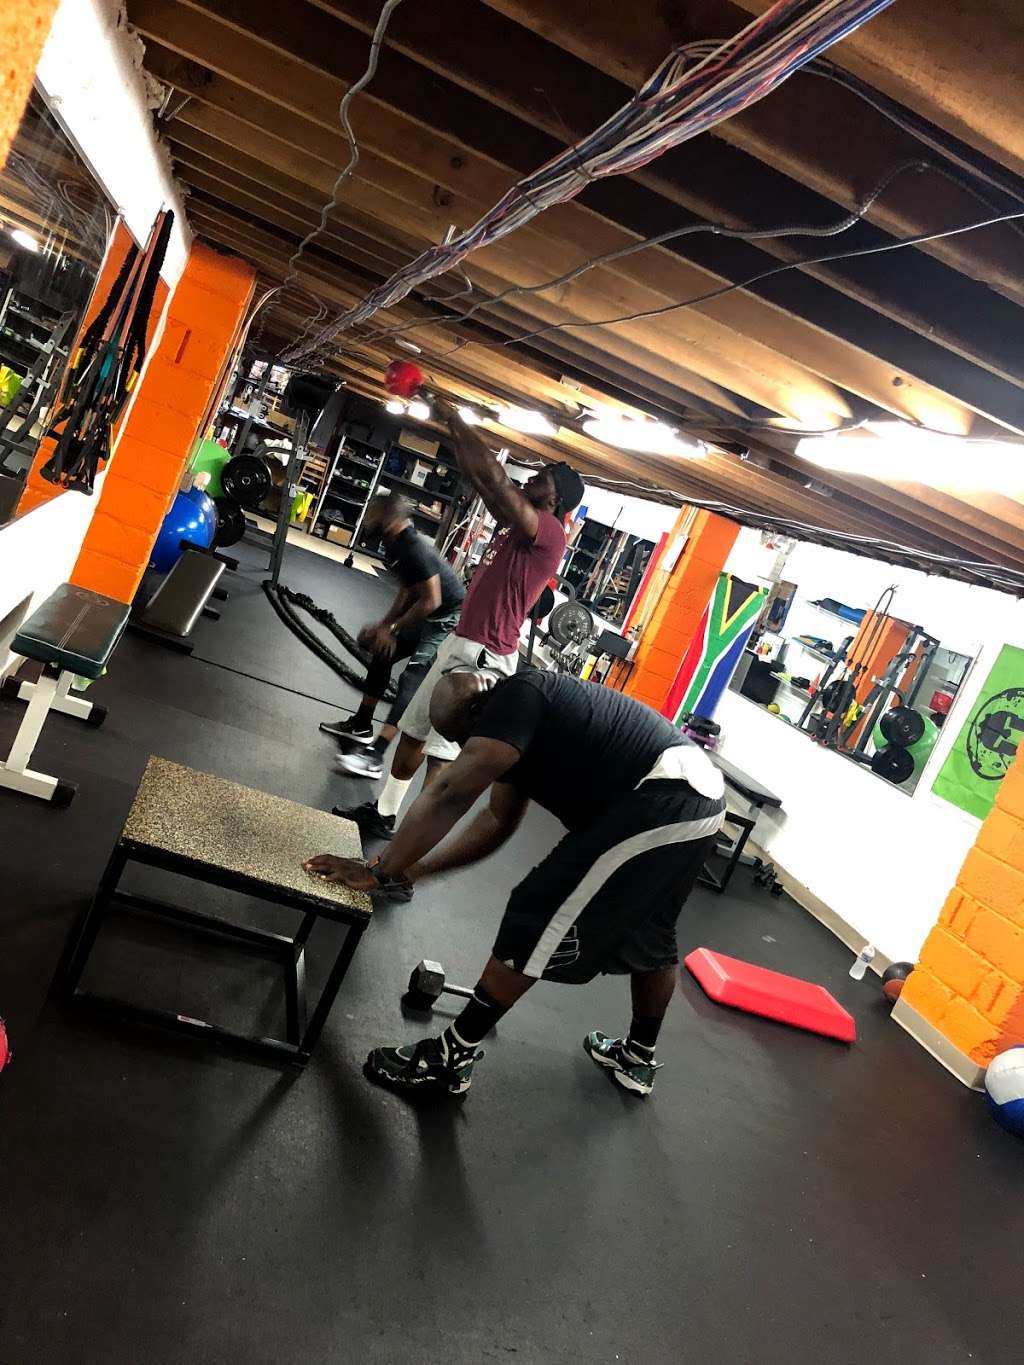 Maine Objective Fitness | Lets Be Elite Fitness, 3122 Willits Rd, Philadelphia, PA 19136, USA | Phone: (215) 301-6462